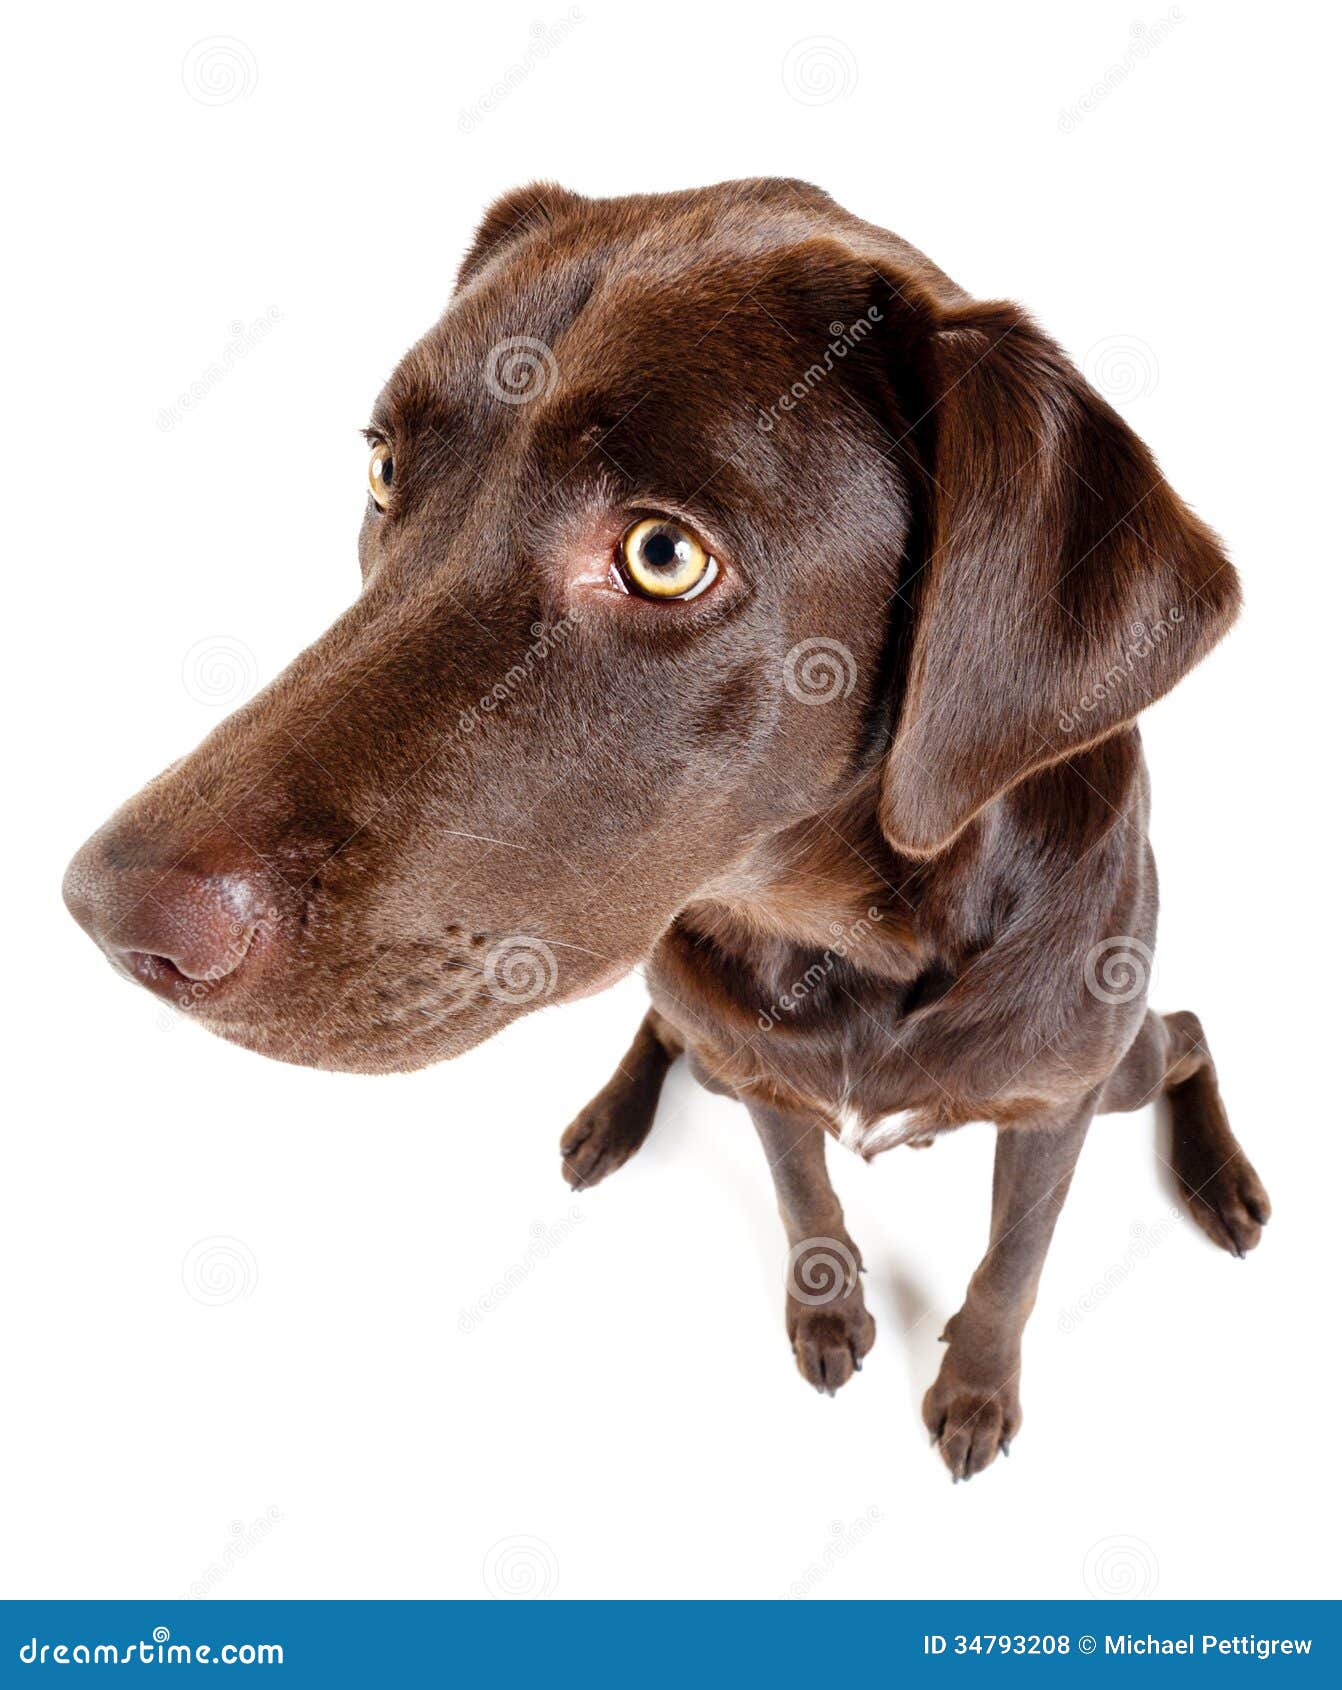 Dog Sitting And Looking On The Side. Royalty Free Stock Photos - Image